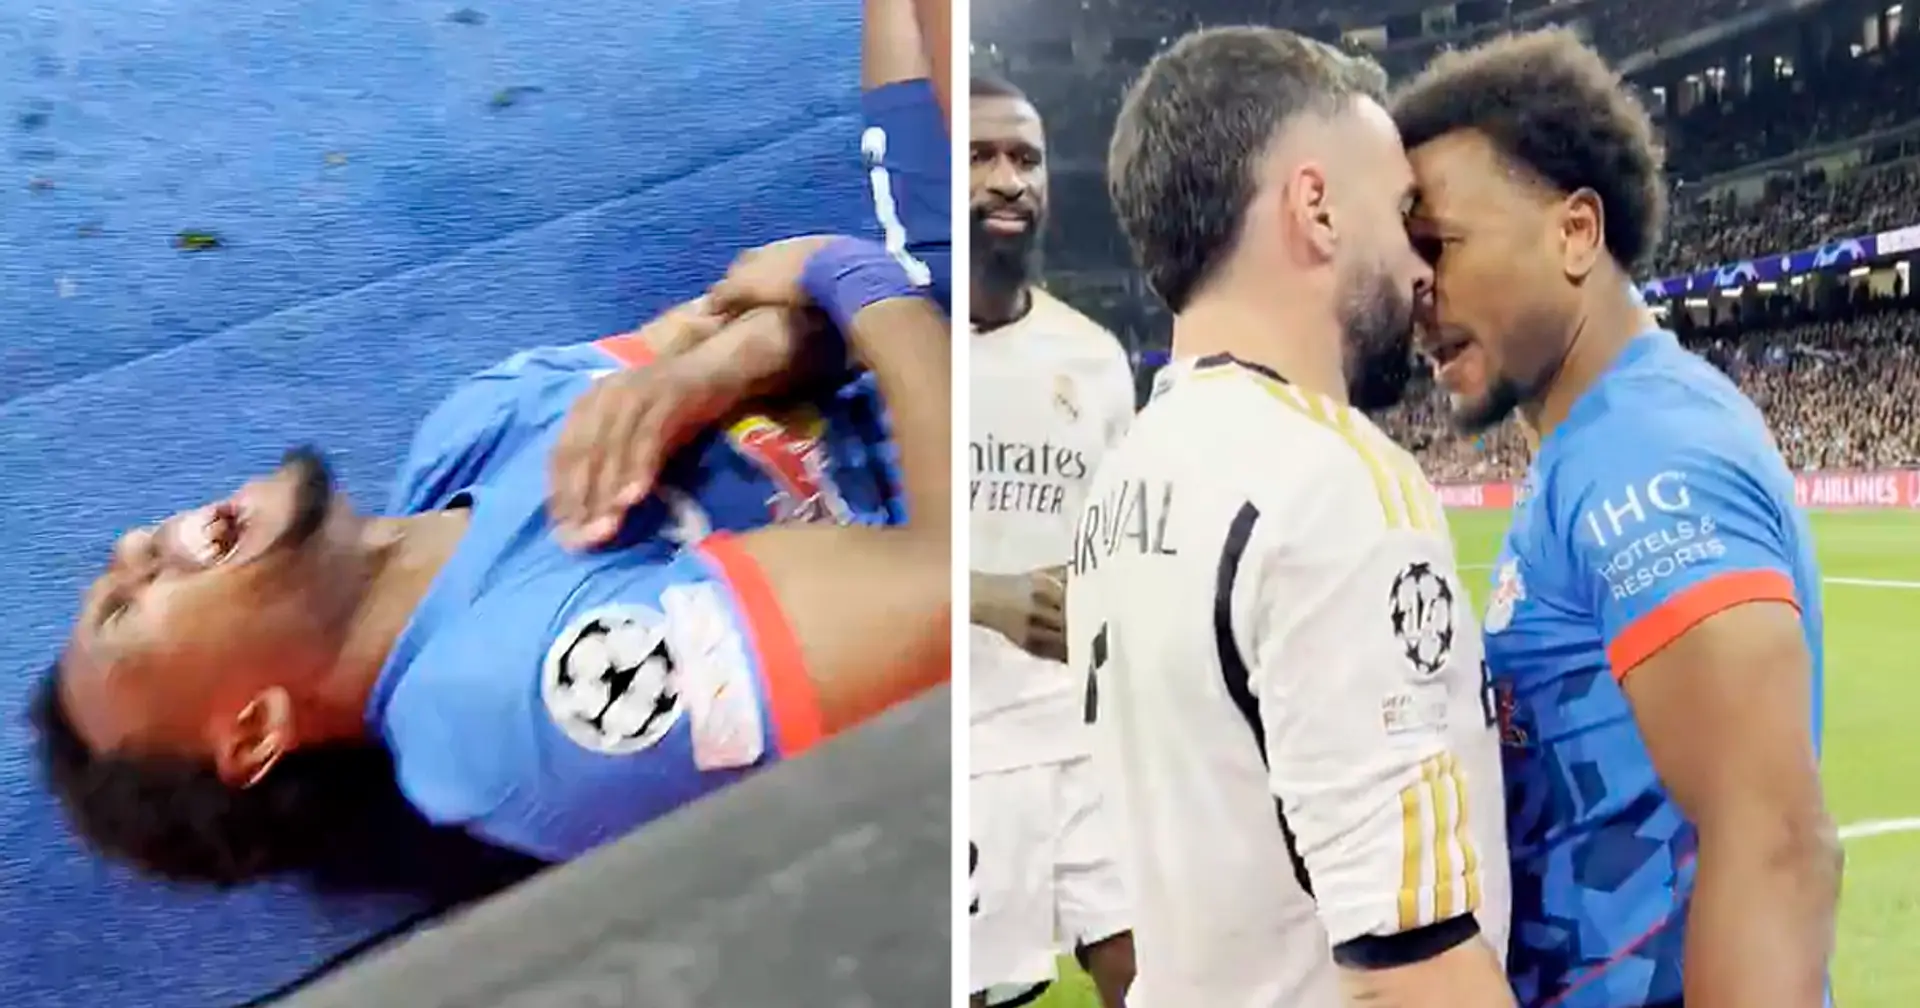 Spotted: Carvajal confronts Openda telling him to get up quicker - Rüdiger helps avoid brawl